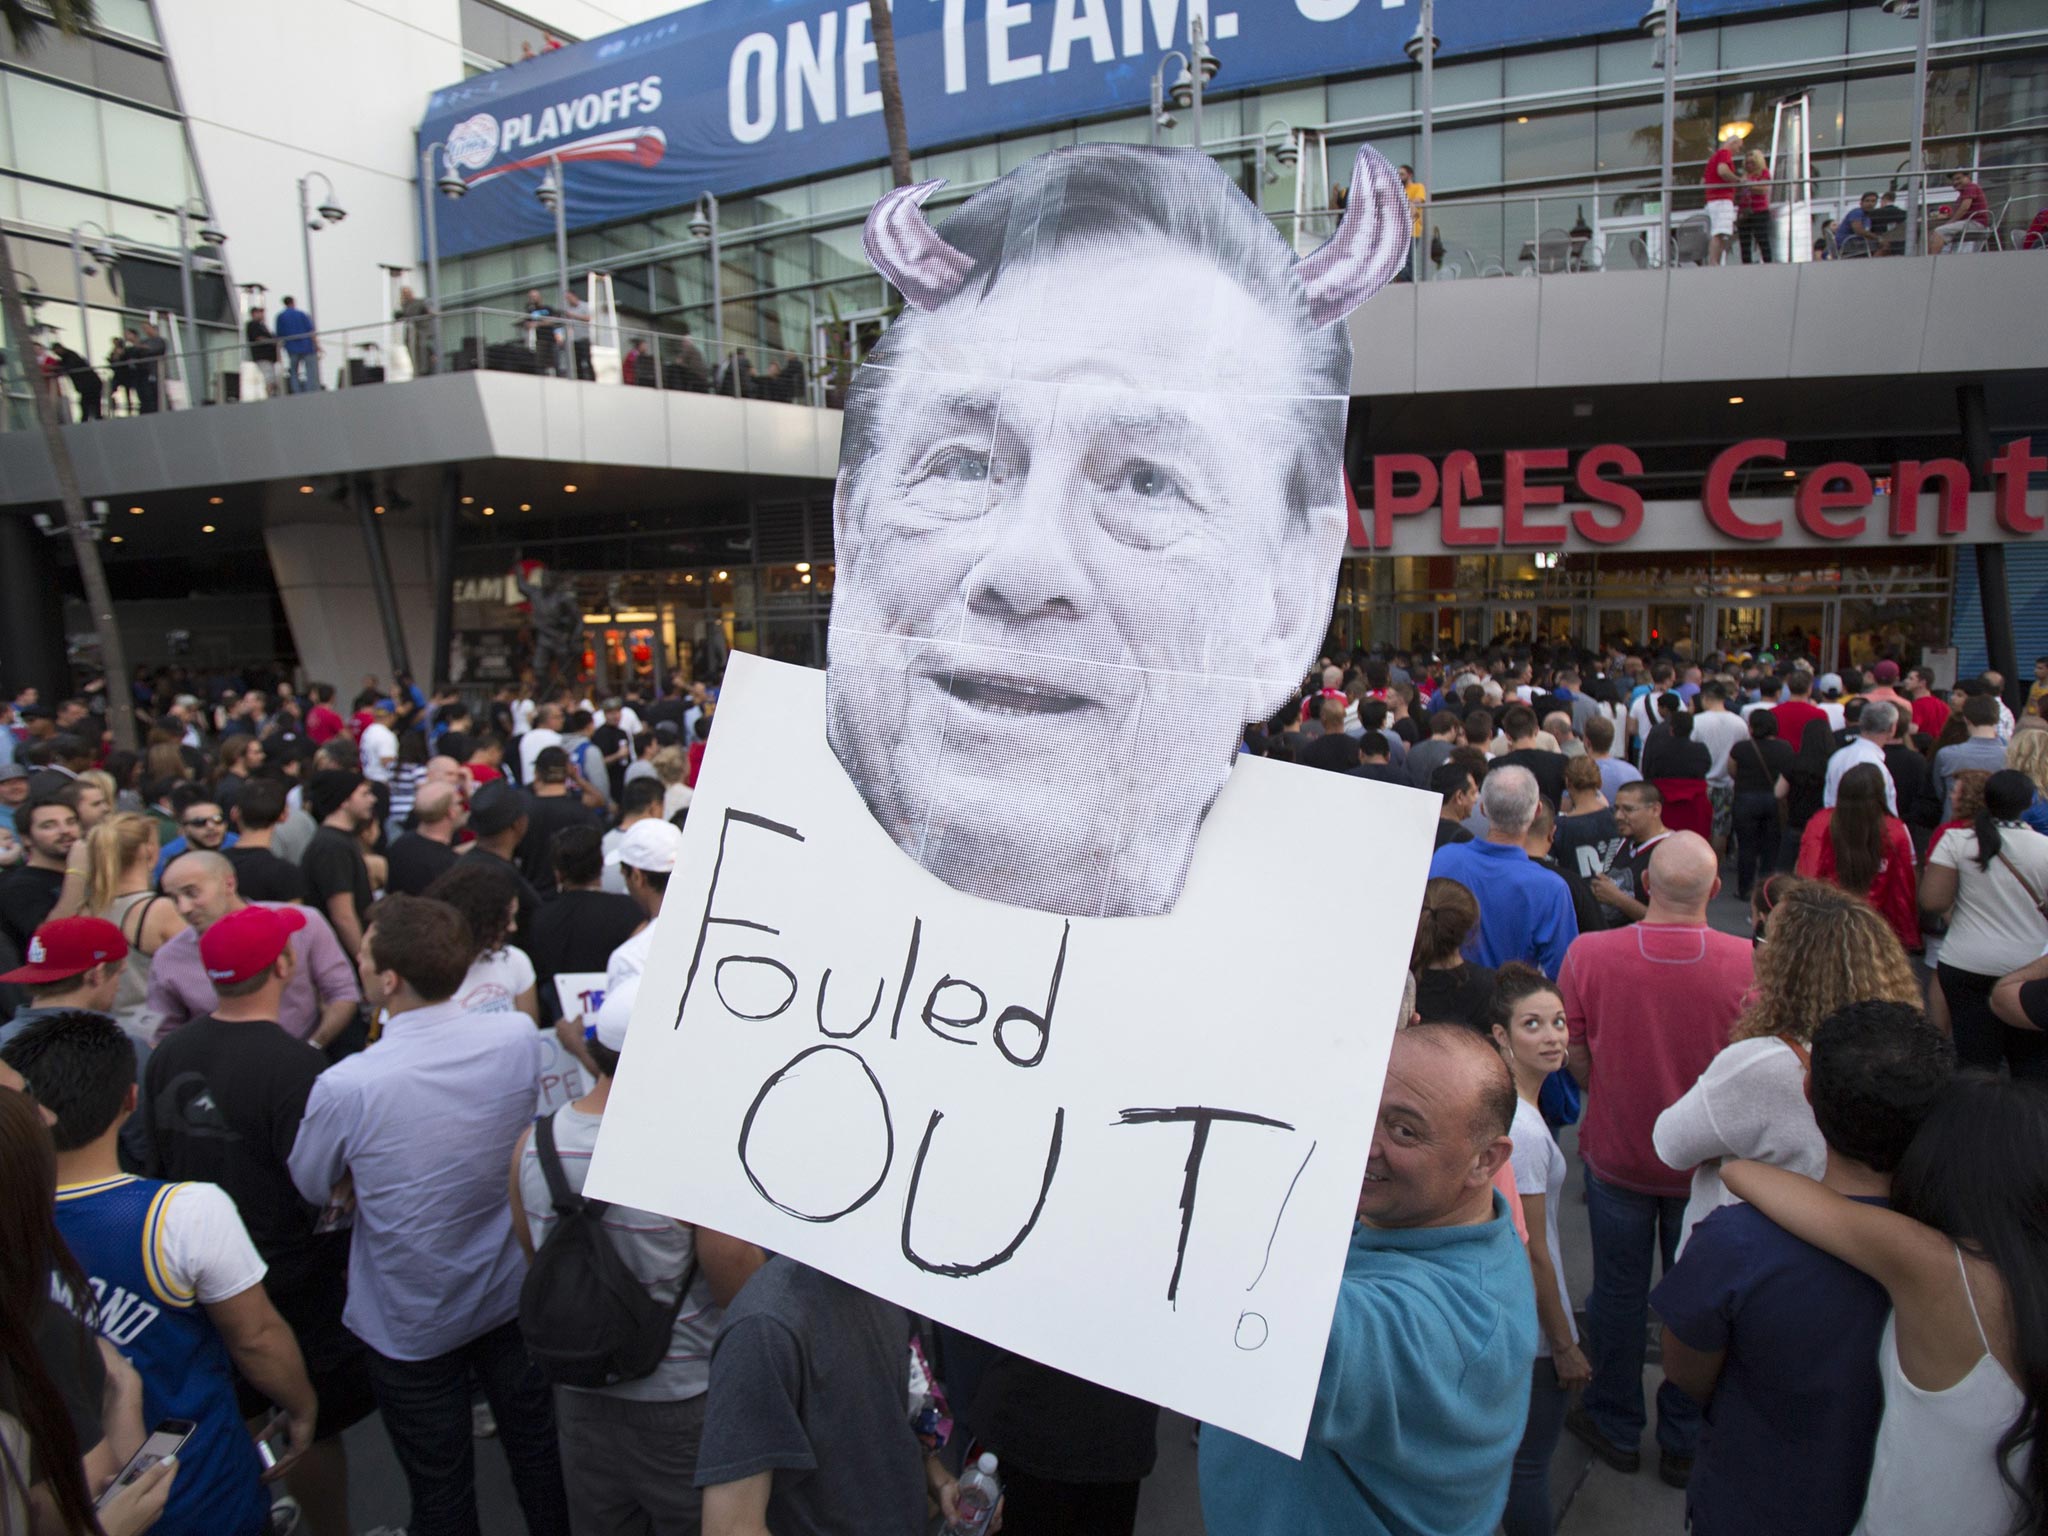 Basketball fans in Los Angeles make their feelings on Donald Sterling clear